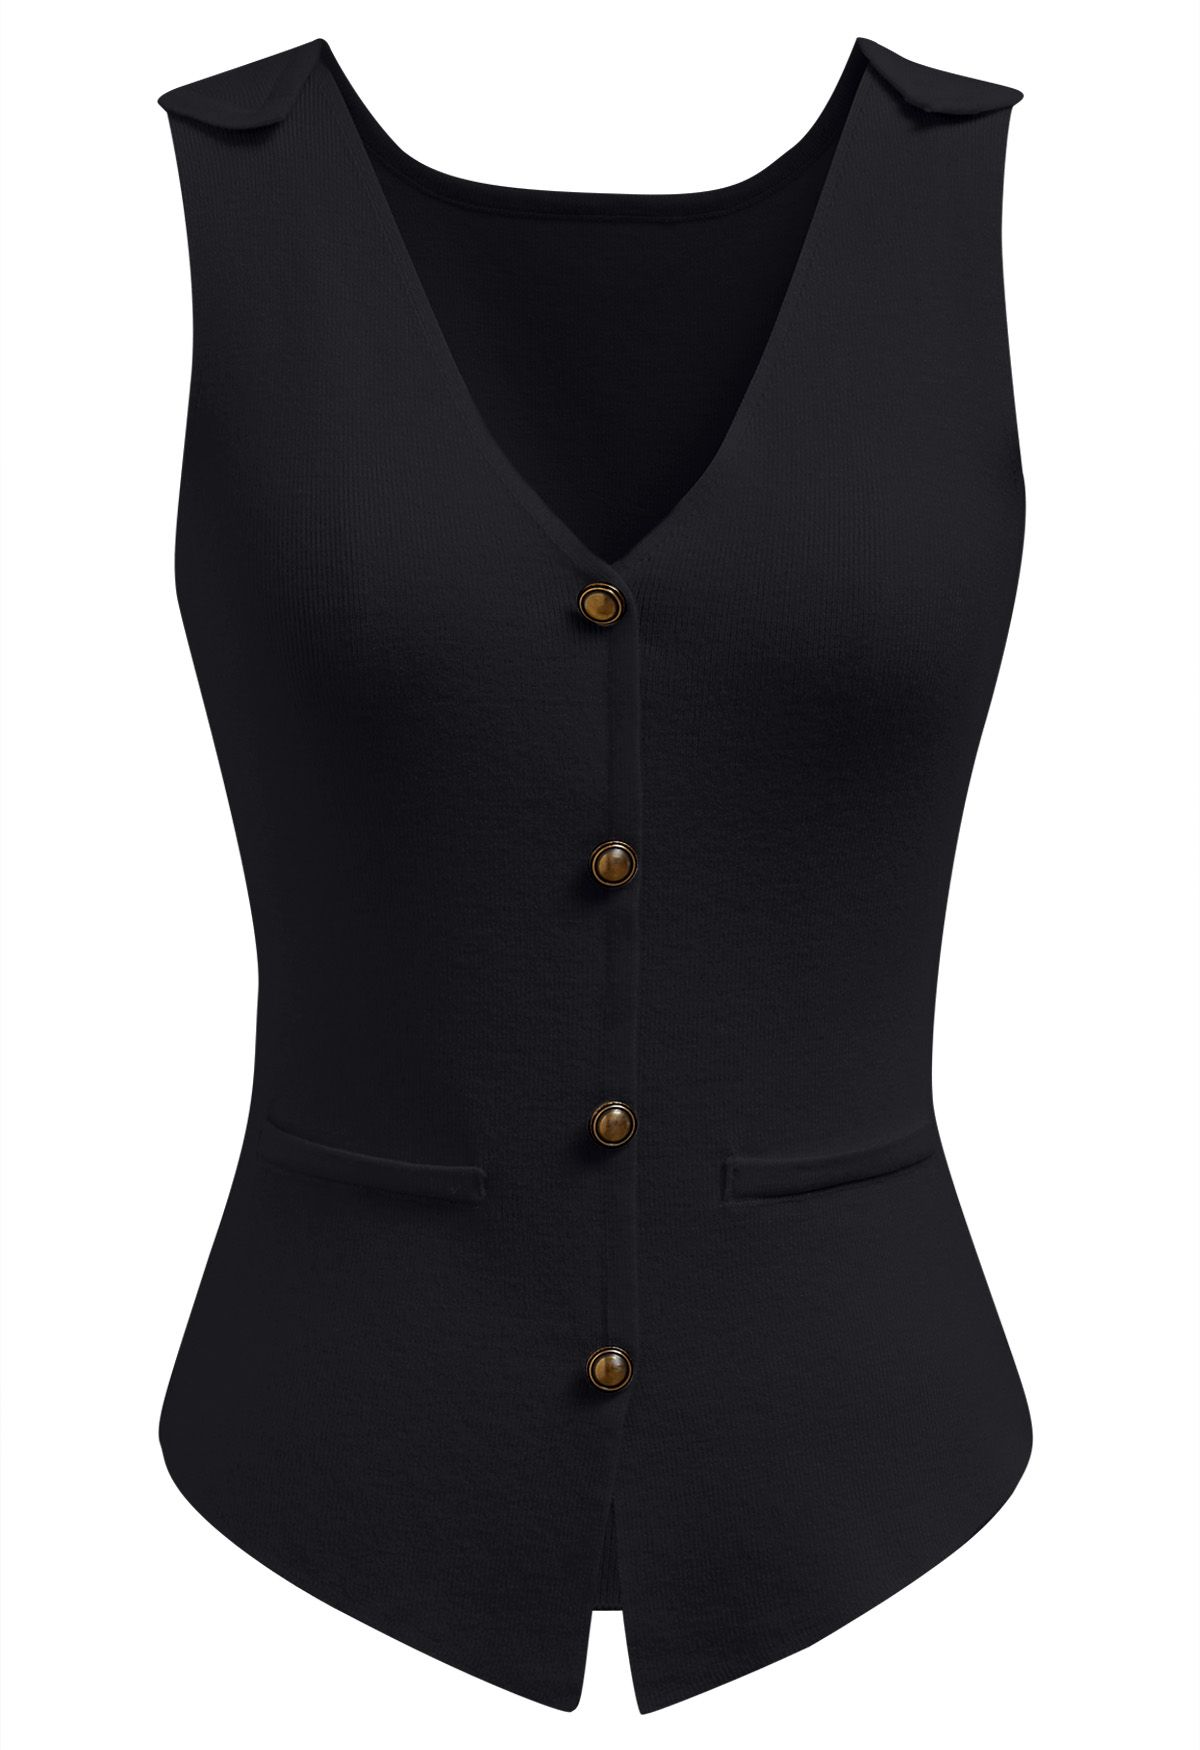 Cutout Back Buttoned Sleeveless Knit Top in Black